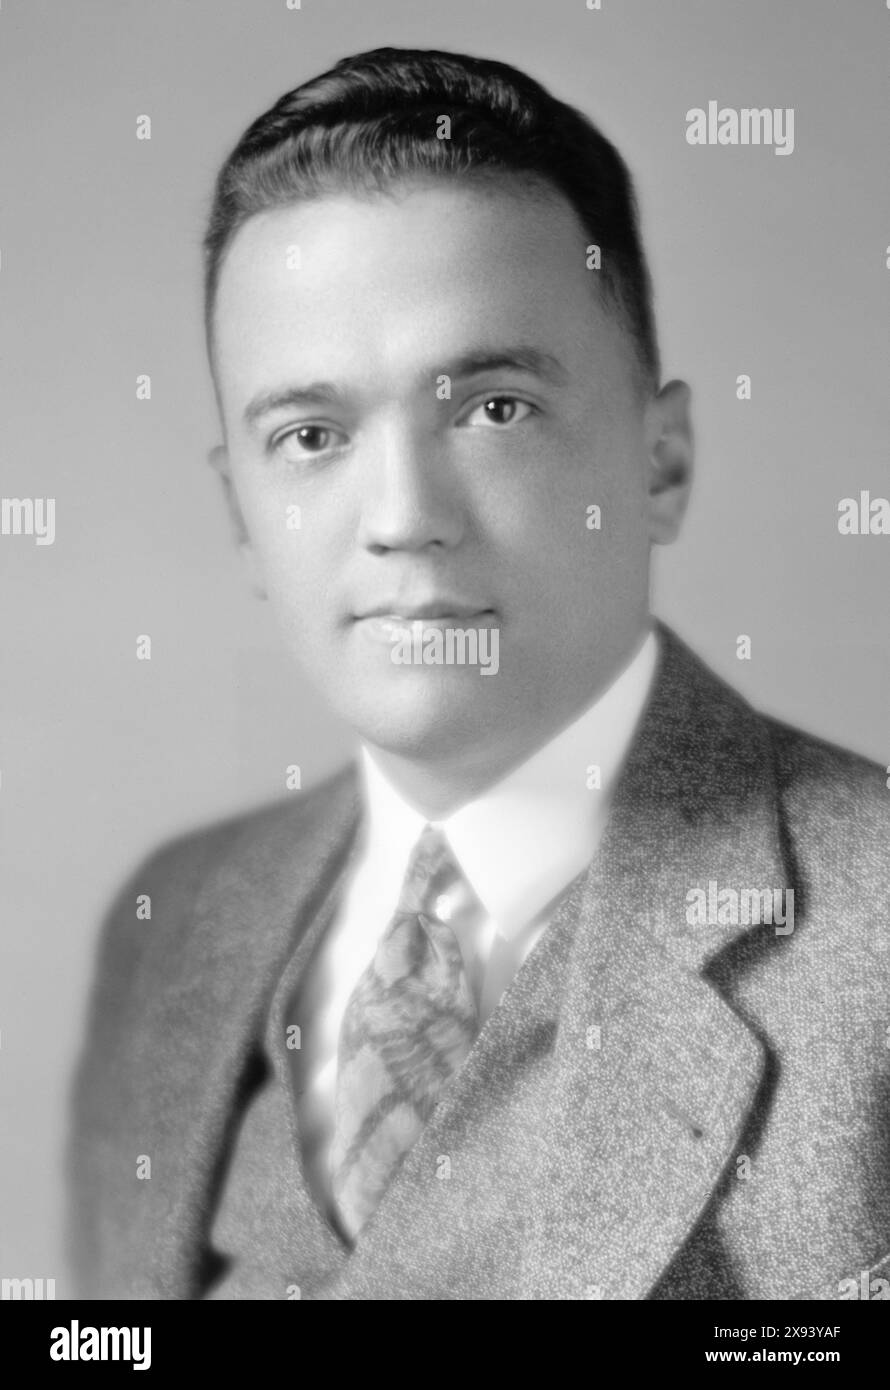 J. Edgar Hoover (1895-1972), final Director of the Bureau of Investigation (BOI) and first Director of the Federal Bureau of Investigation (FBI). Stock Photo